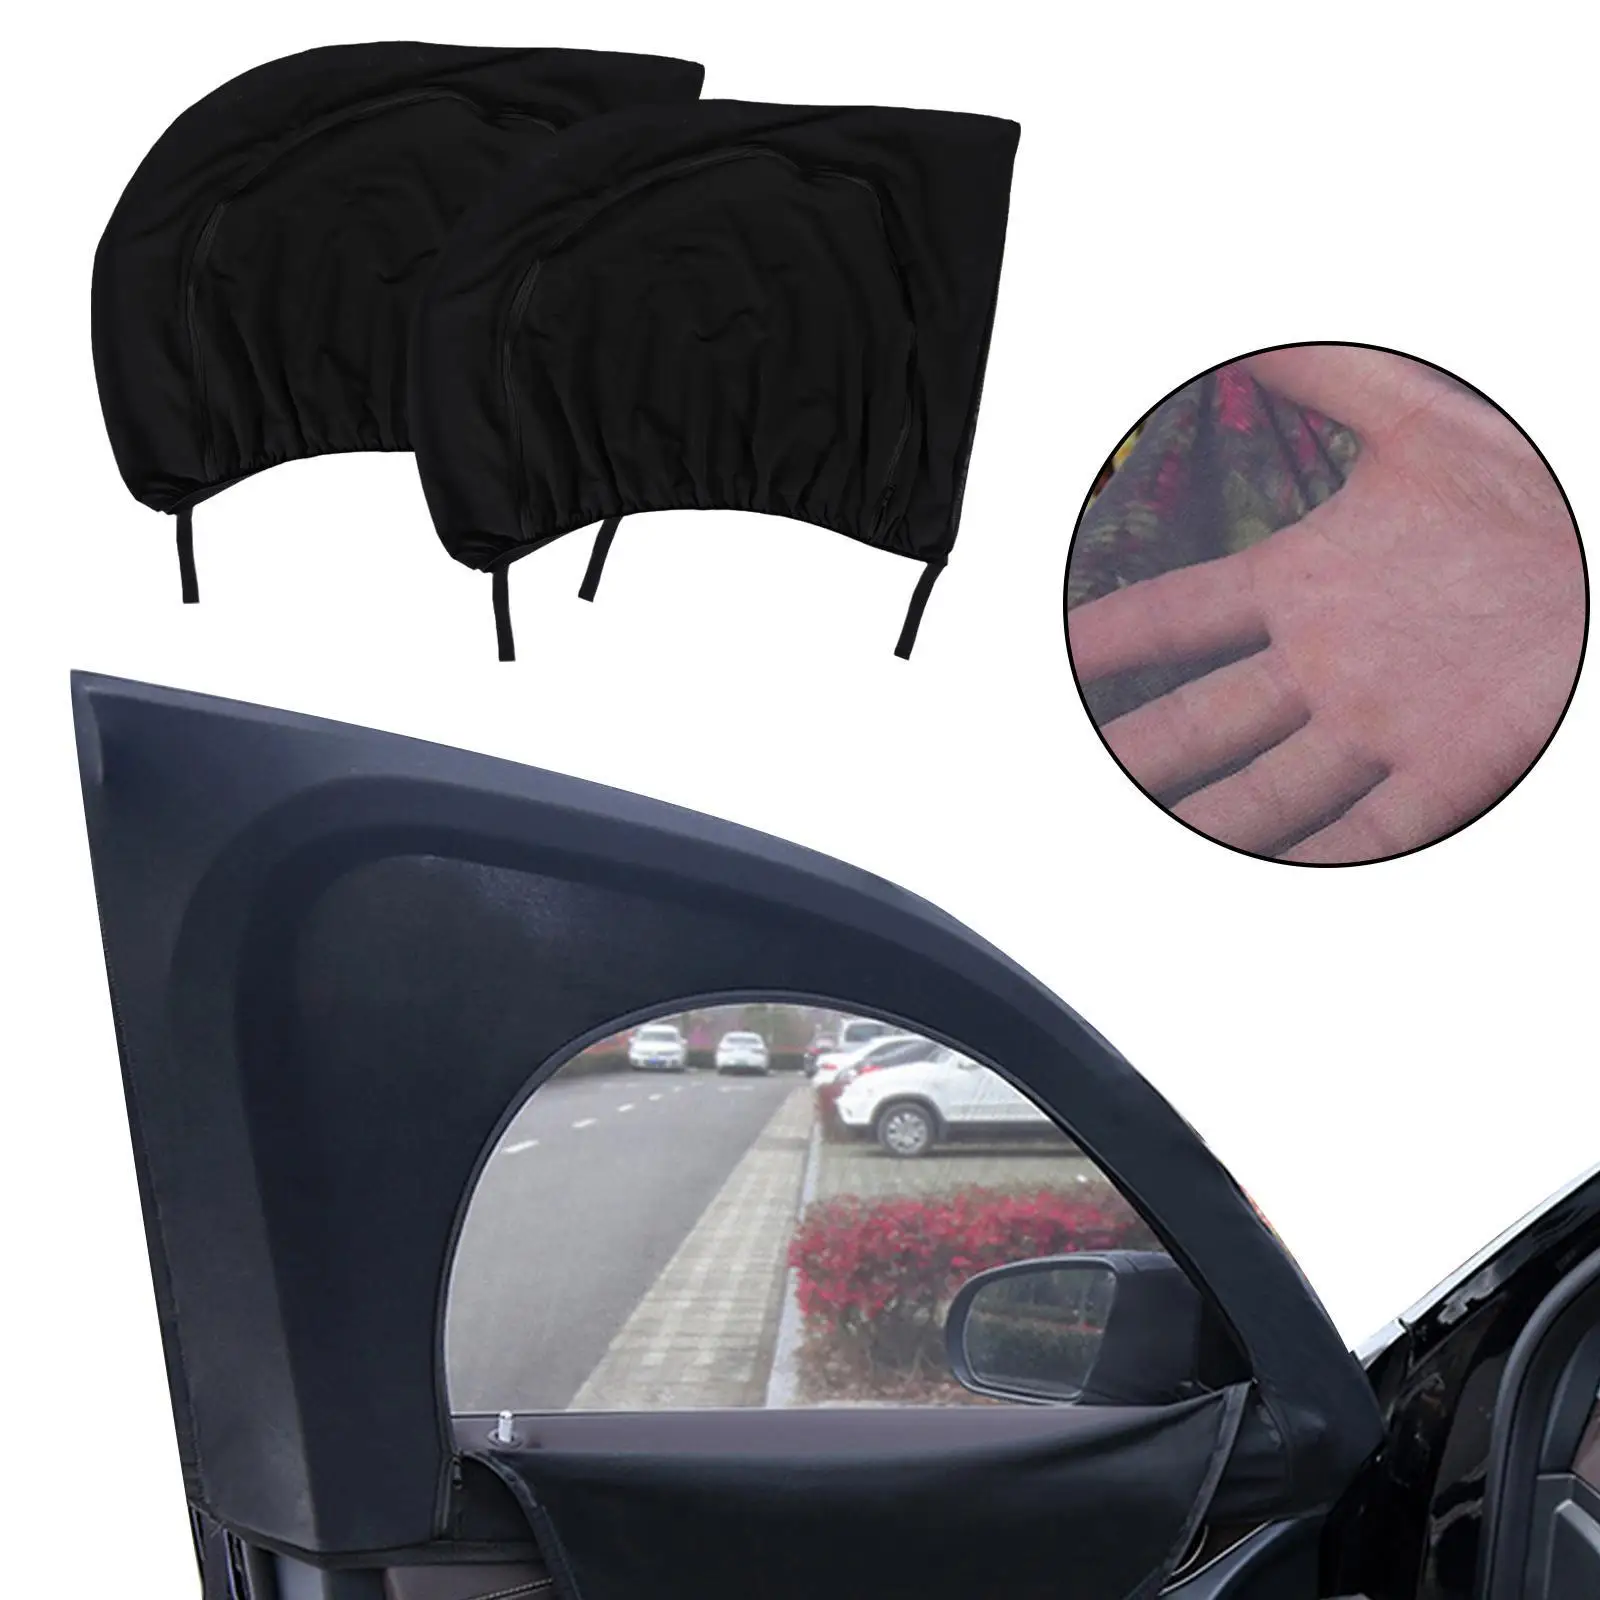 

2pcs Car Rear Side Window Sunshade UV Protect Shield Mesh Prevent Mosquito Sunshine Privacy Protection Foldable Curtain